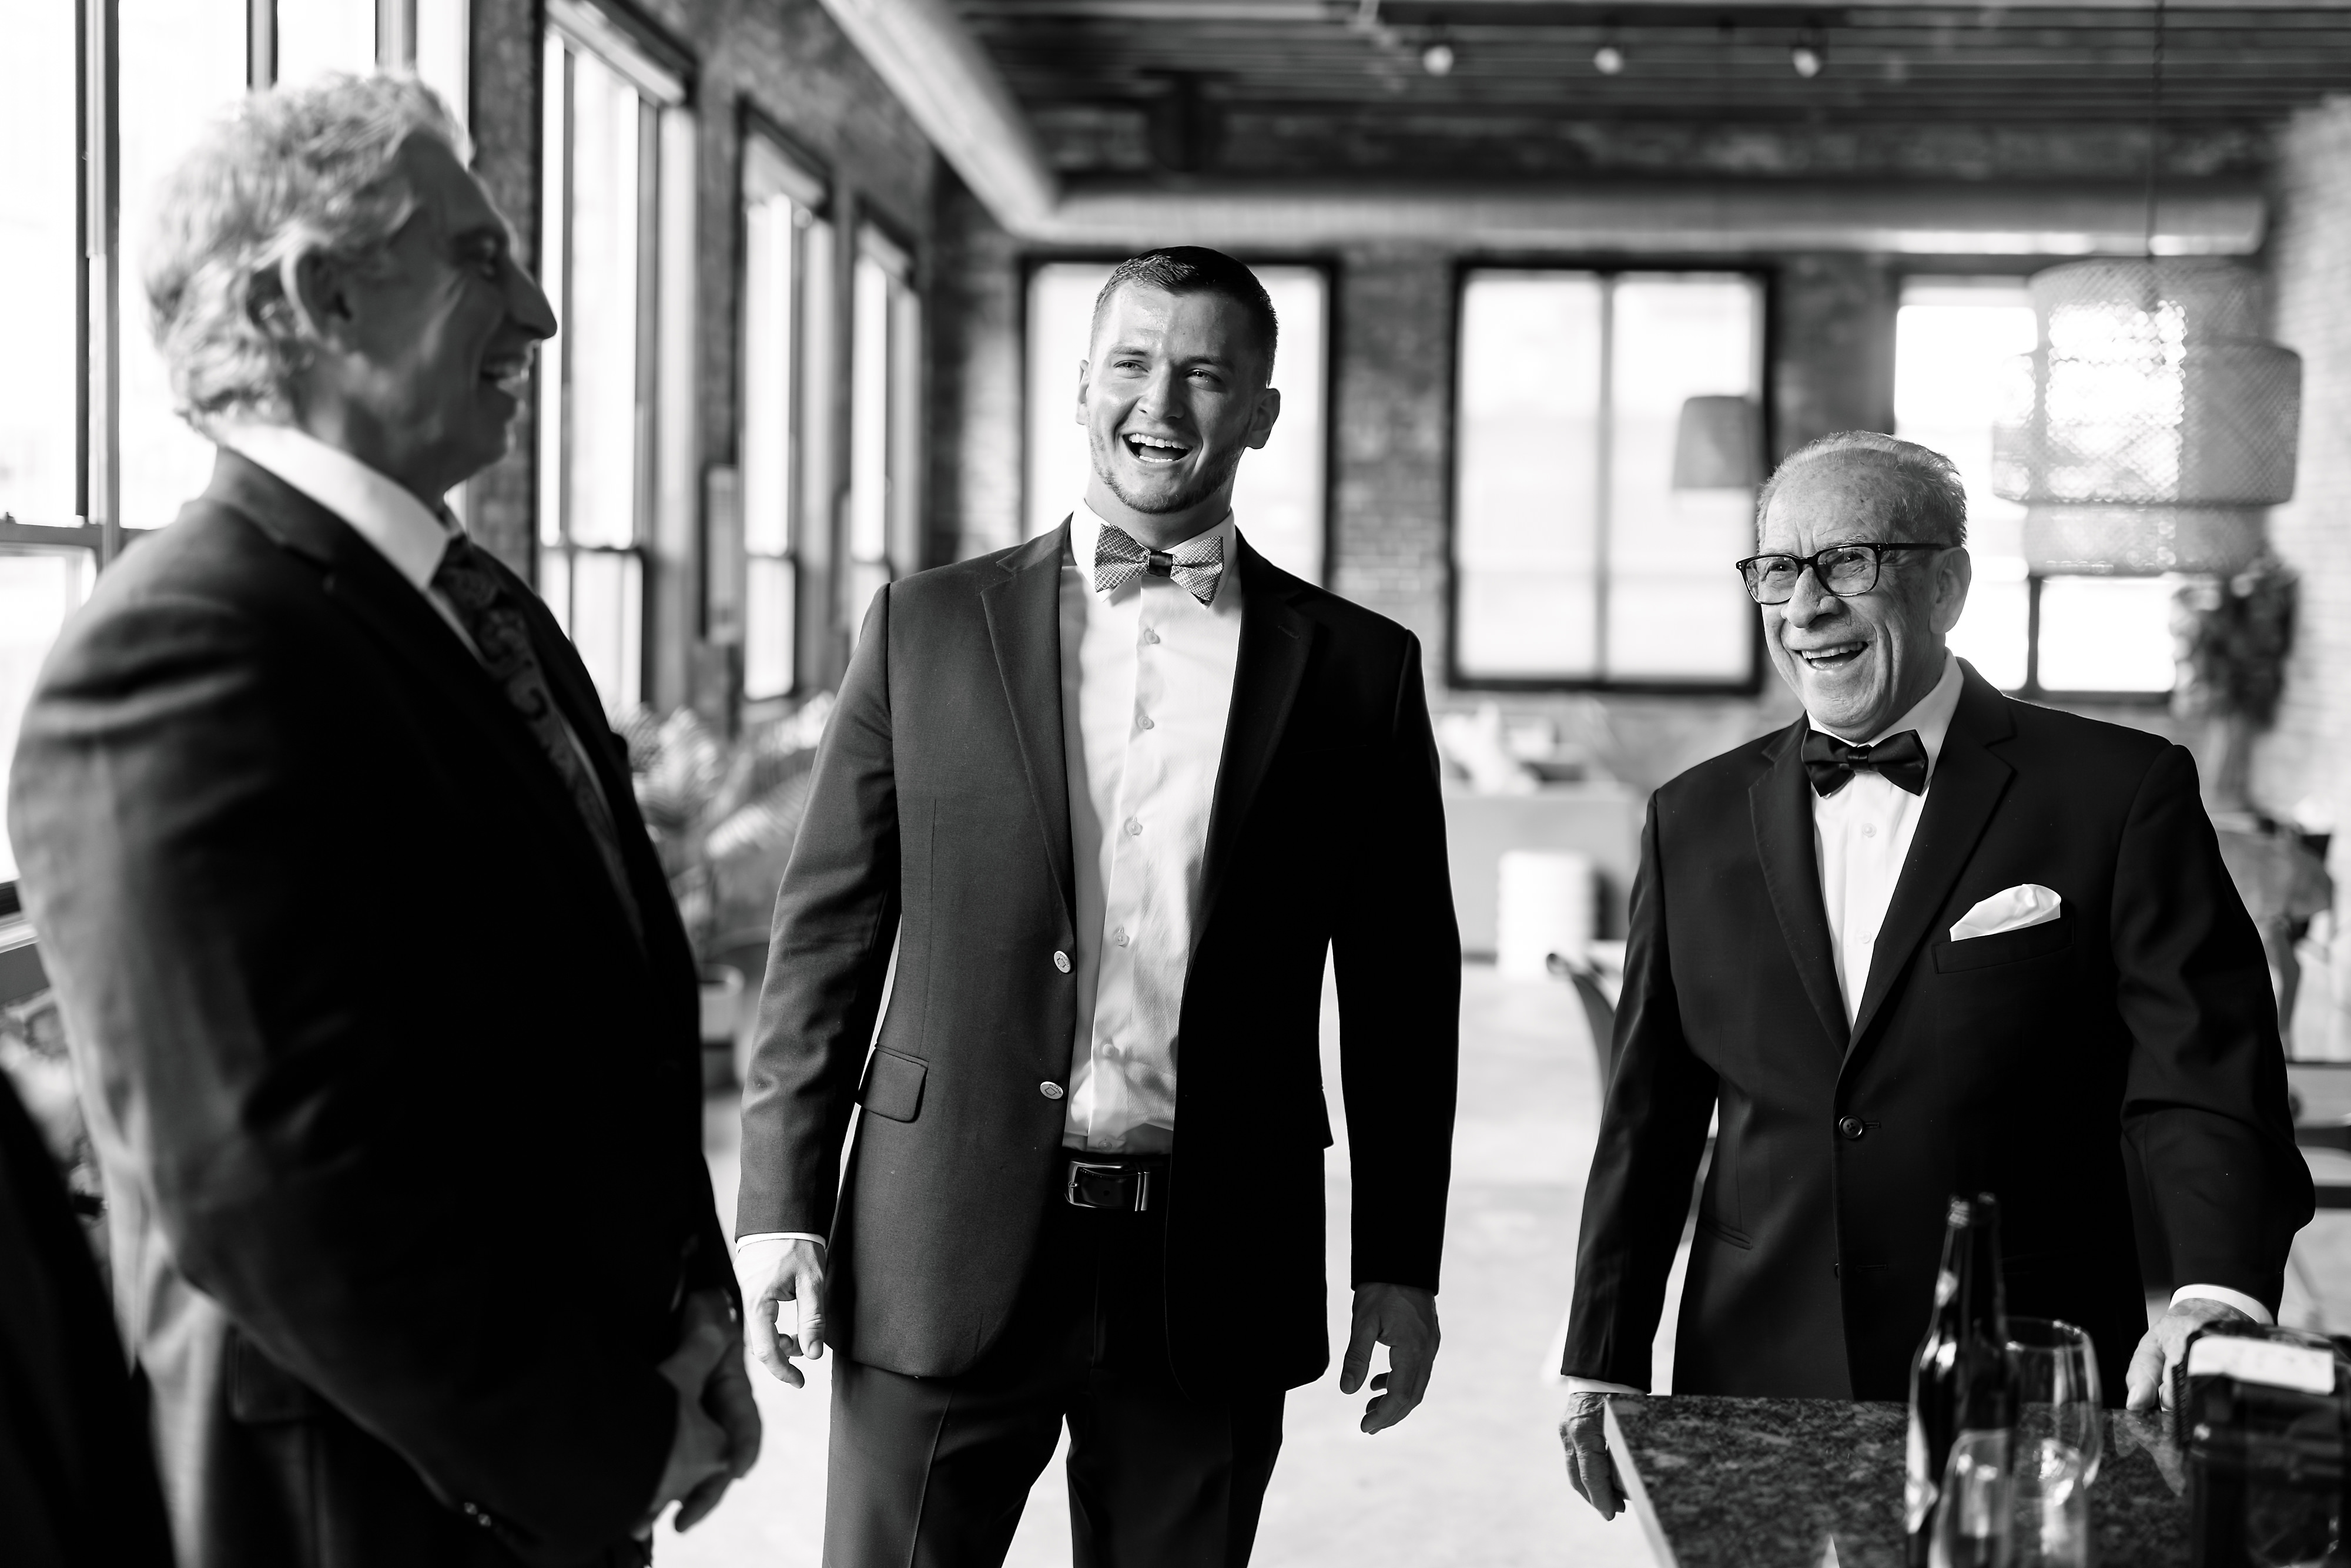 Groomsman and grandfather laughing together